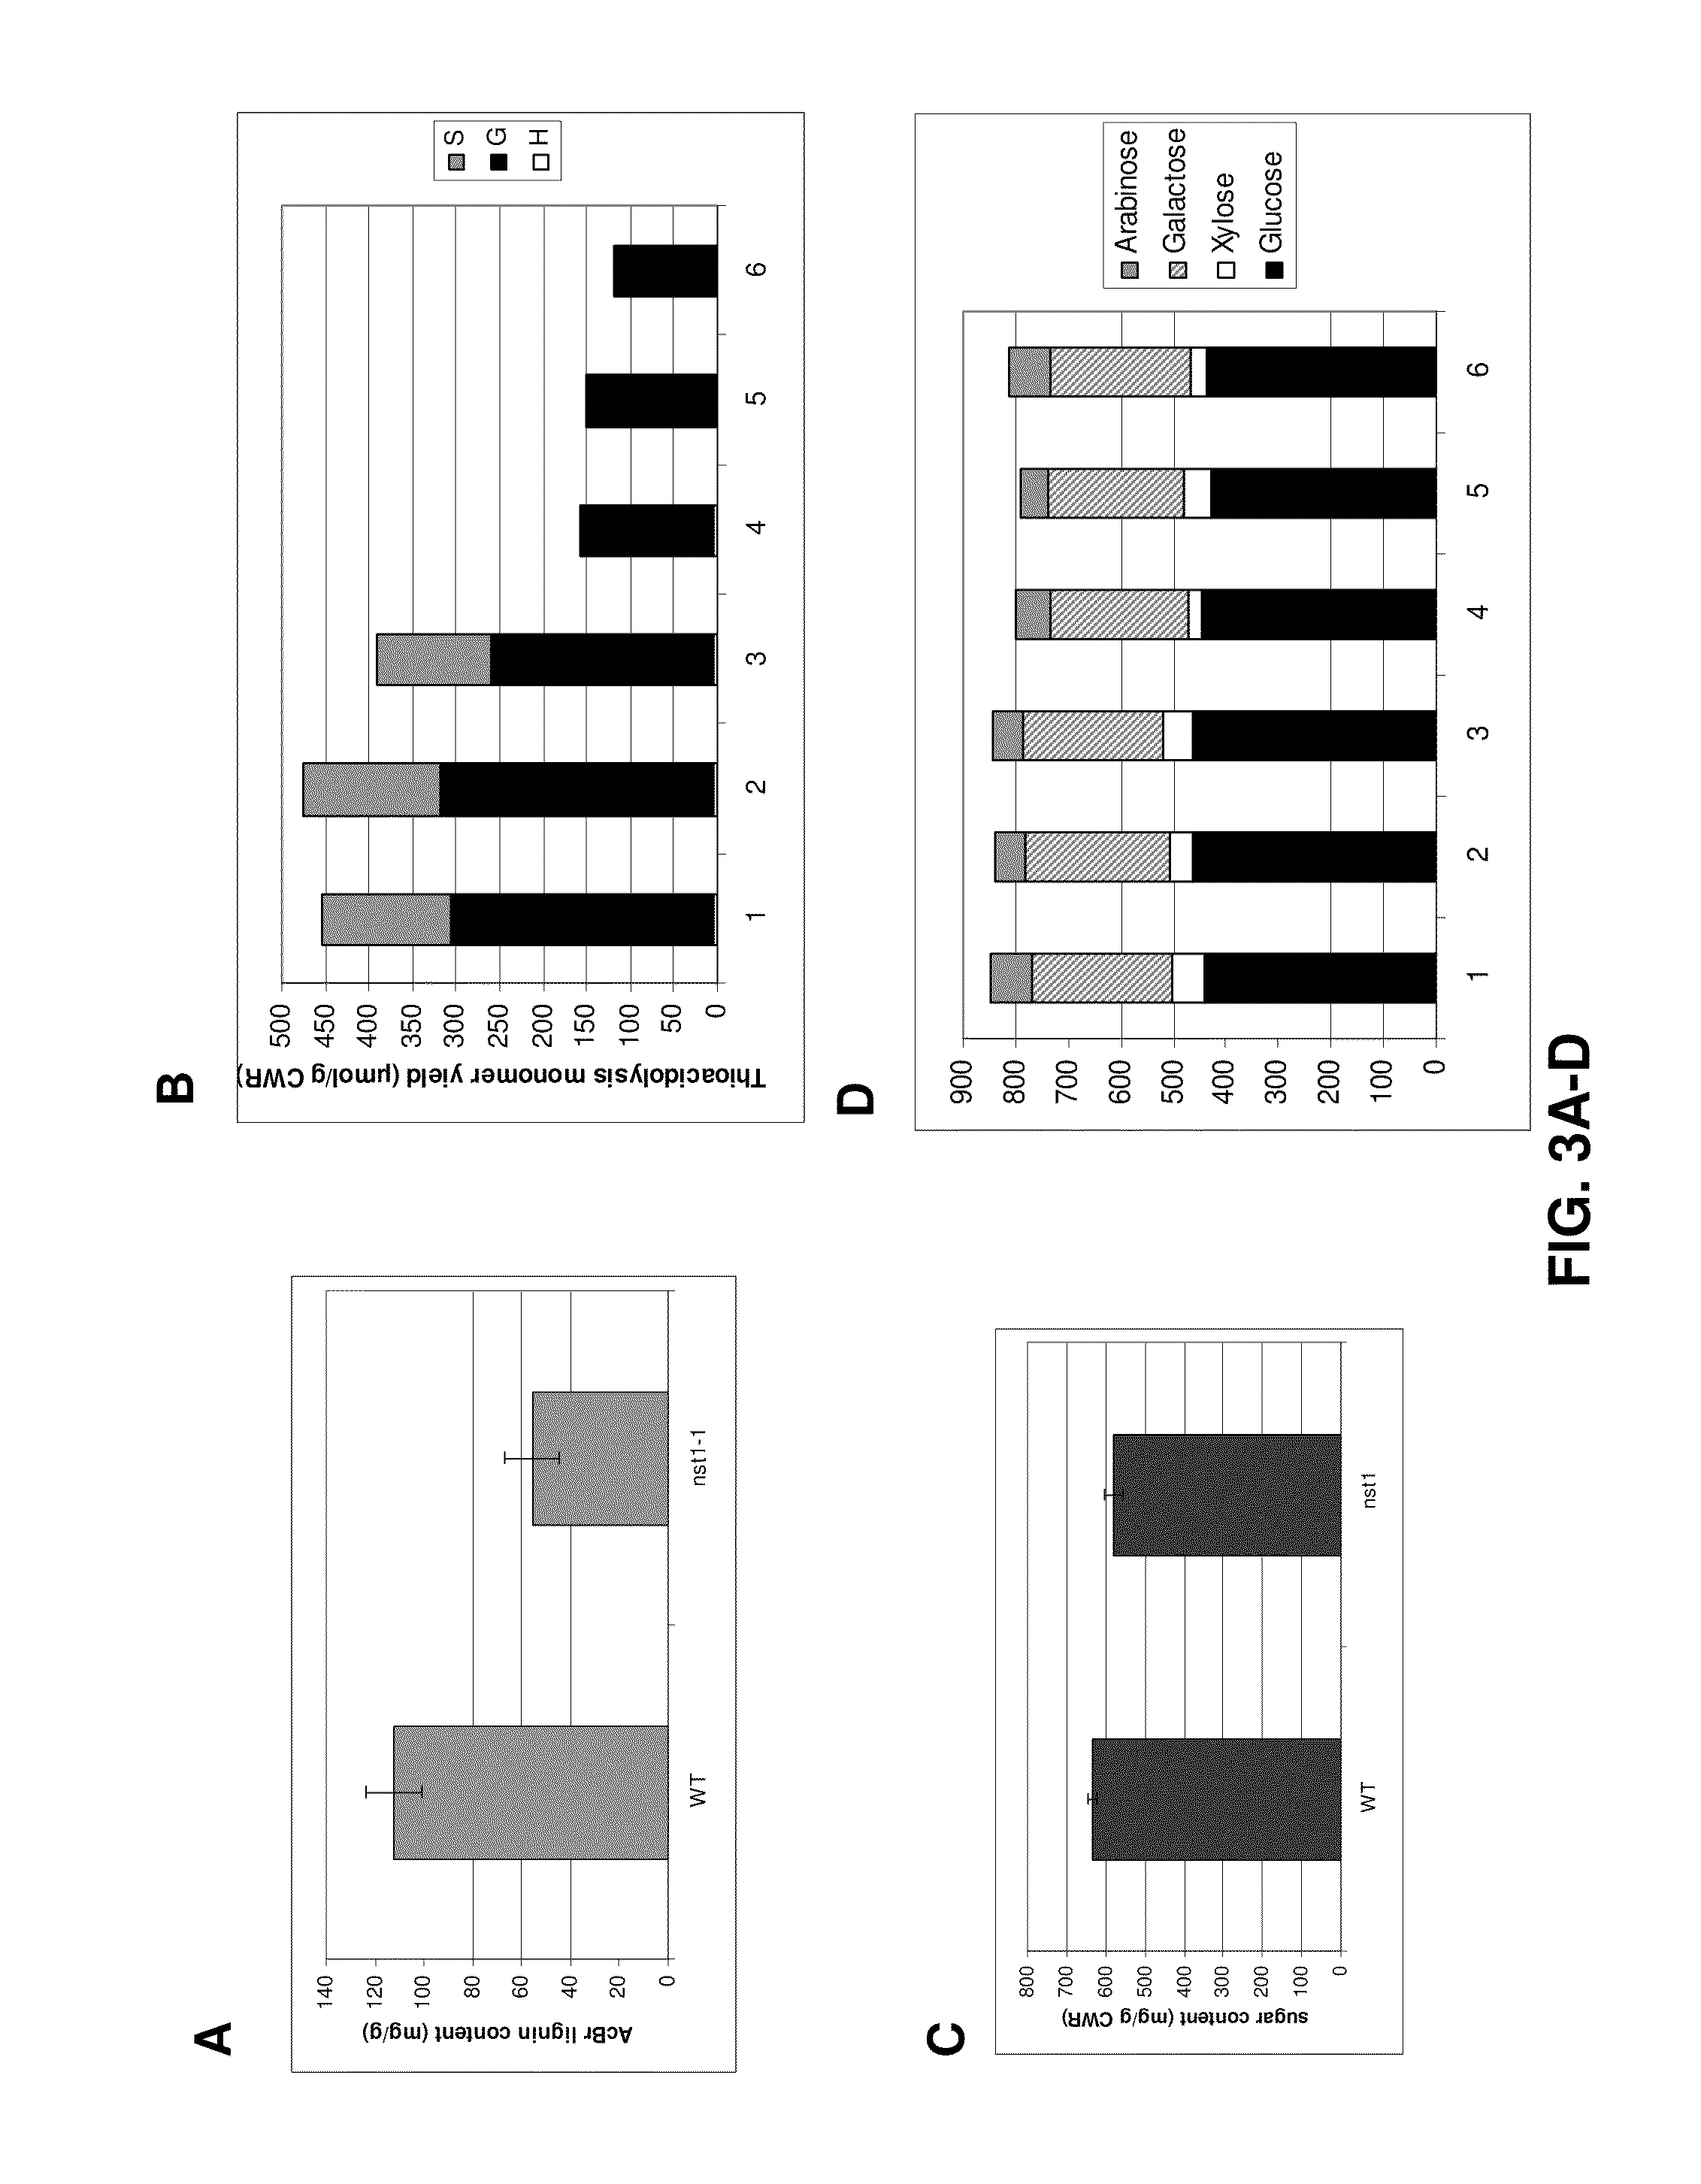 Plants with modified lignin content and methods for production thereof